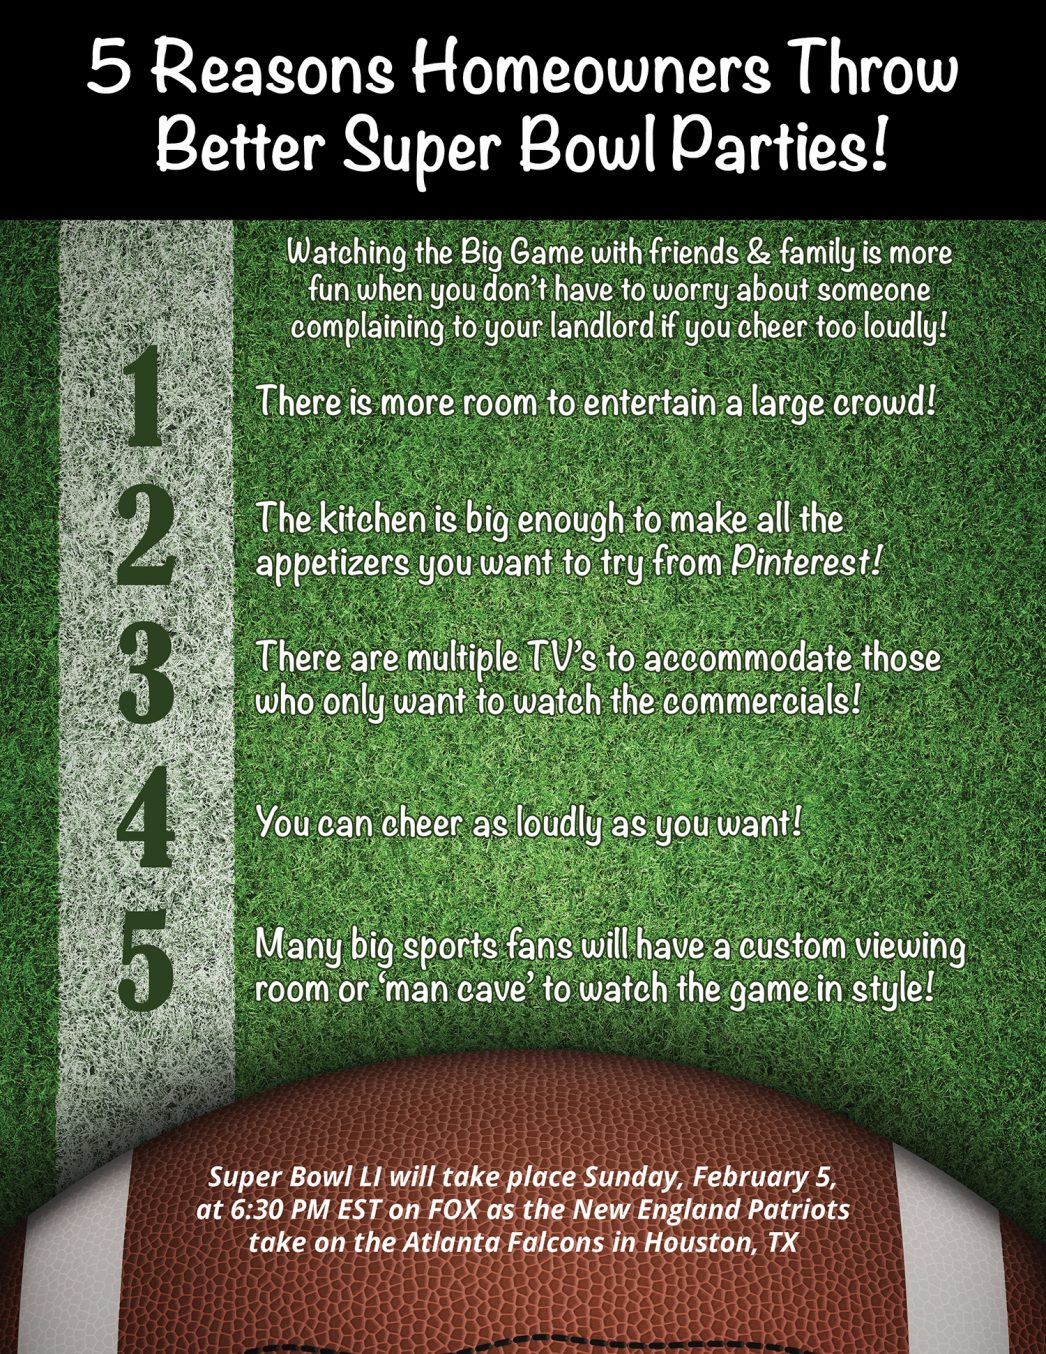 5 Reasons Homeowners Throw Better Super Bowl Parties! [INFOGRAPHIC] | MyKCM